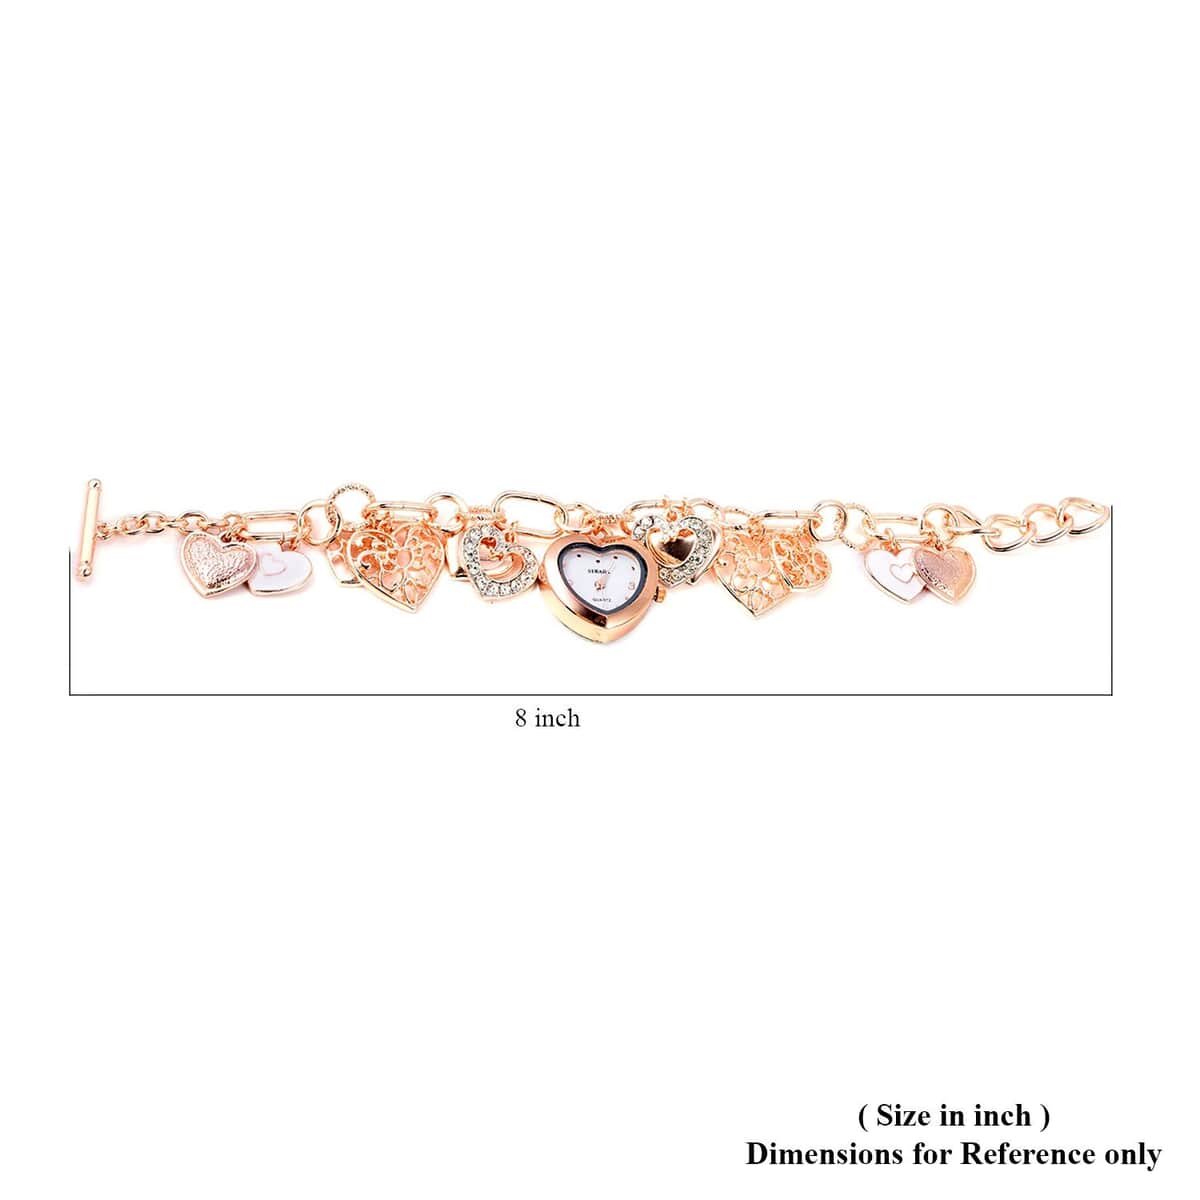 Strada White Austrian Crystal and Enameled Japanese Movement Charm Heart Bracelet Watch in Rosetone (7.5-9 in) image number 4